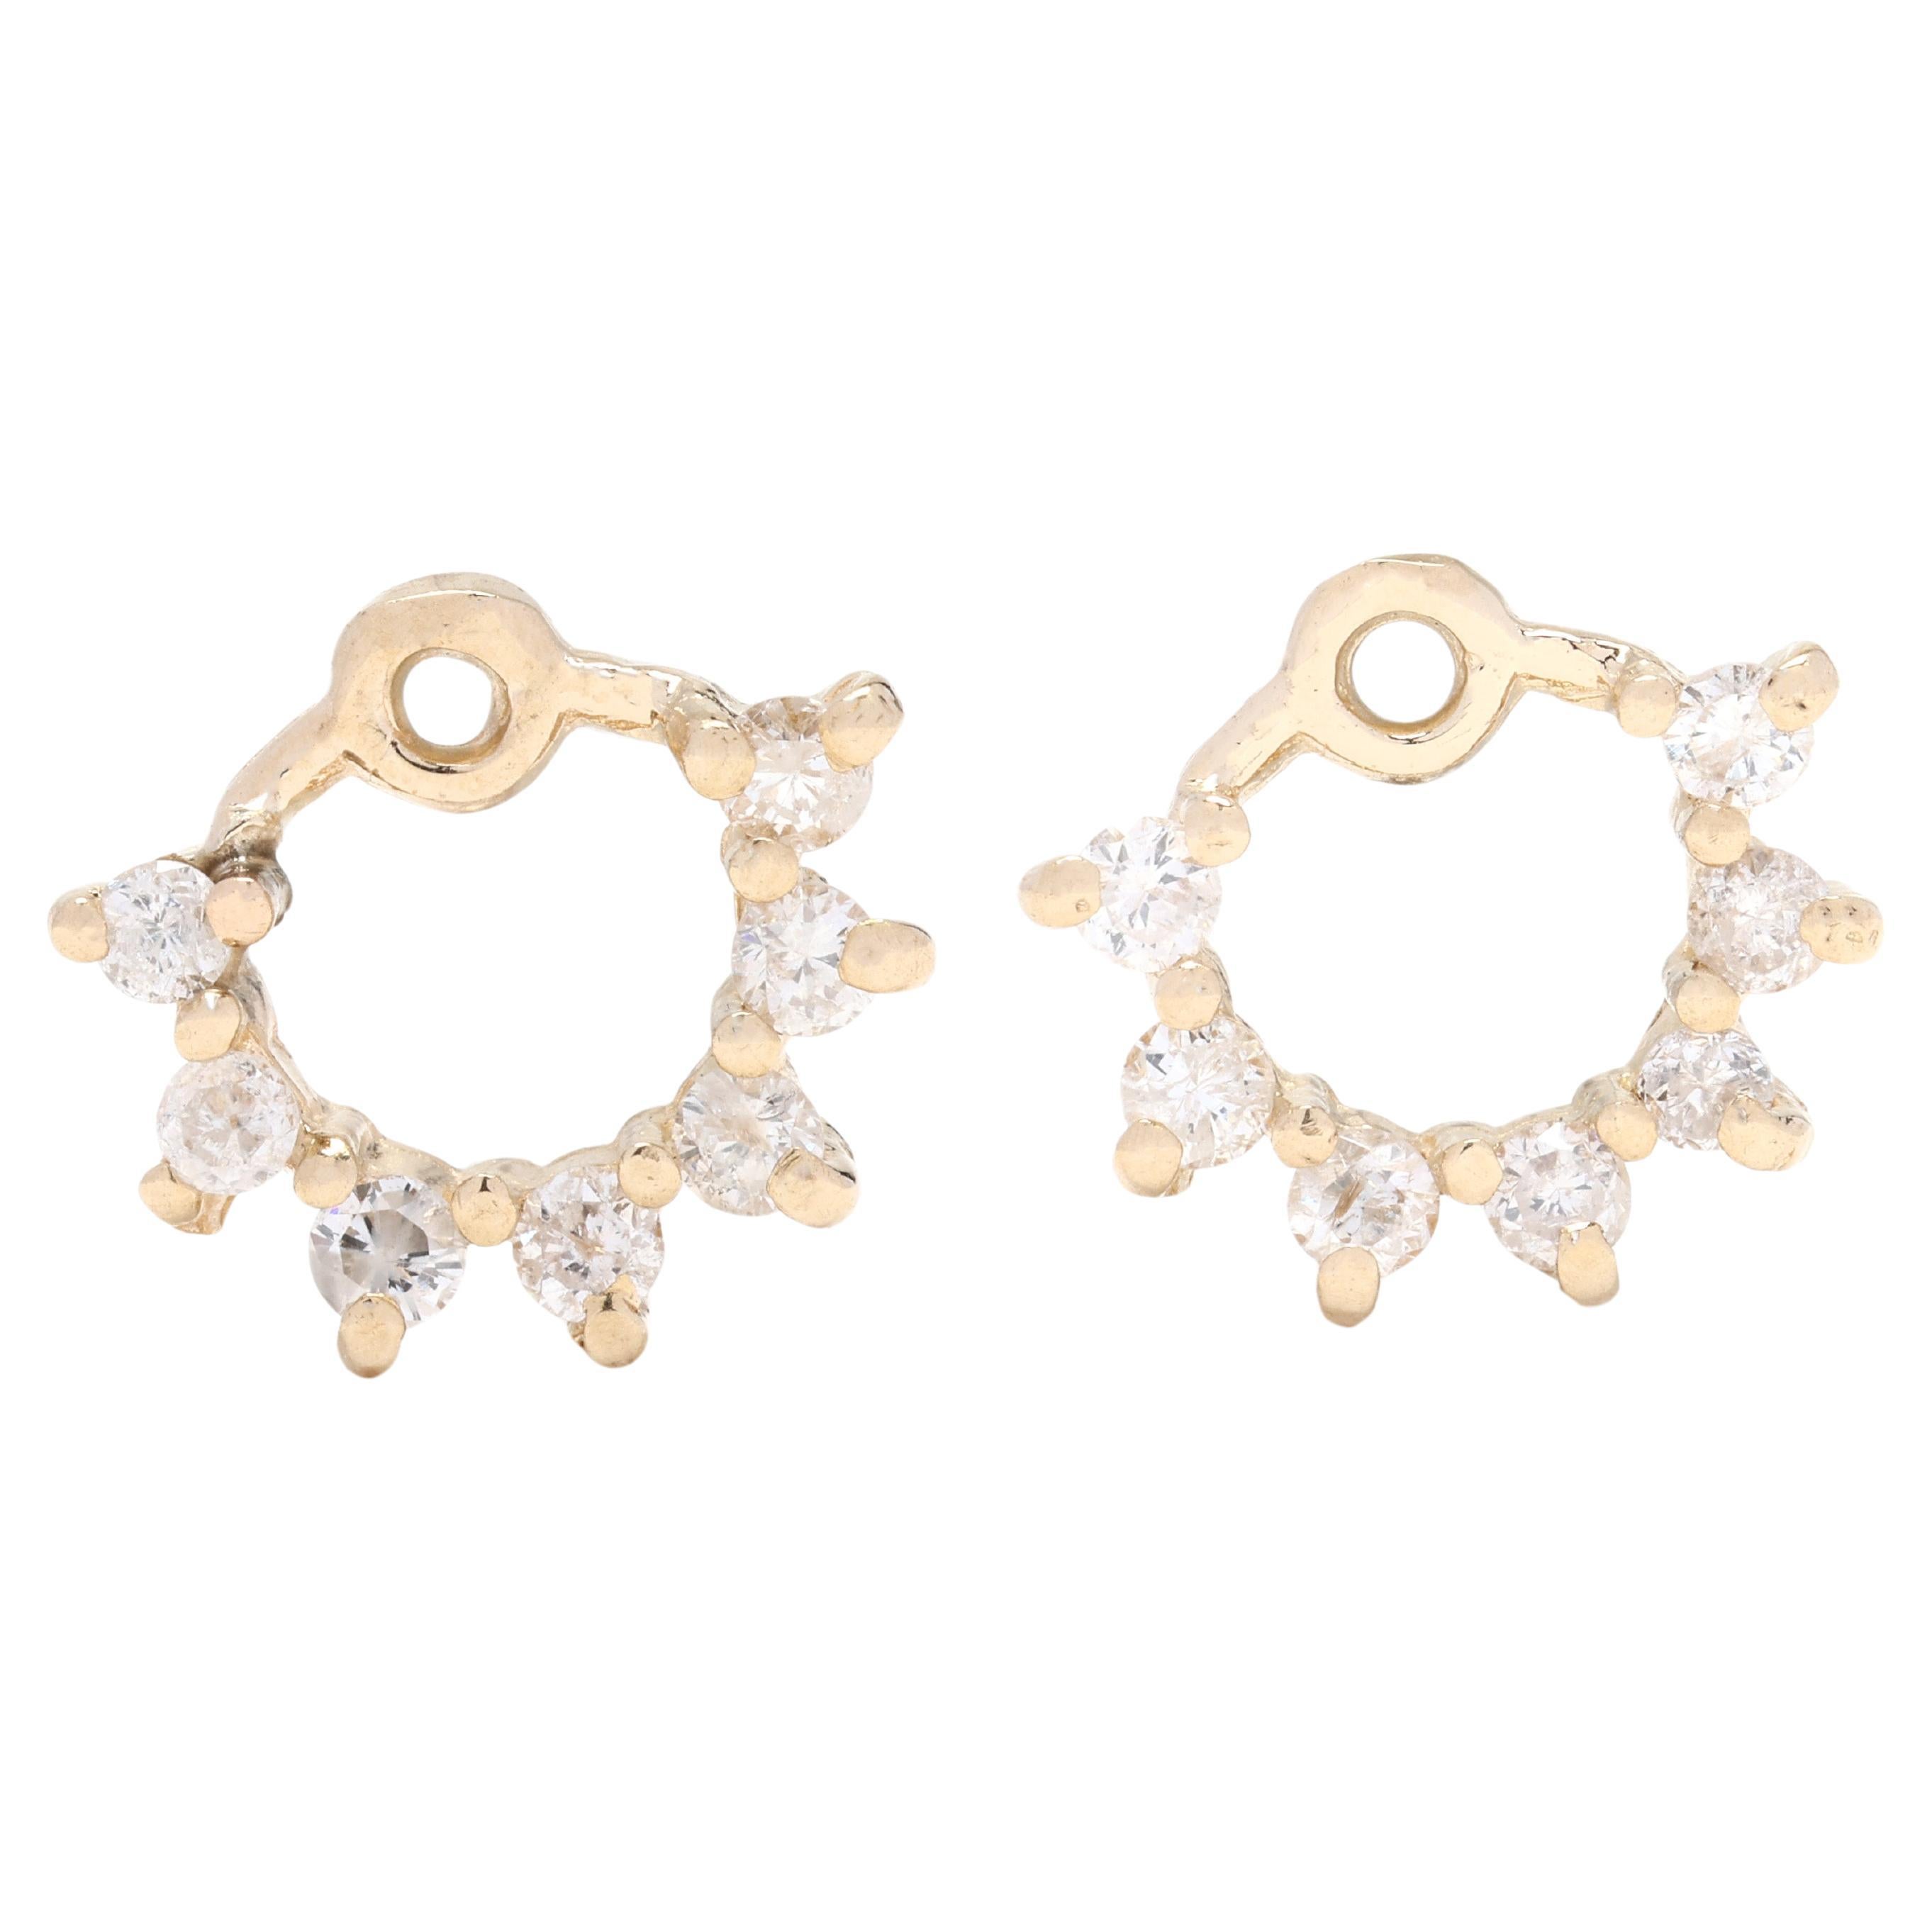 0.25ctw Diamond Earring Jackets, Length 9.6mm, Flower Style, 14k Yellow Gold For Sale